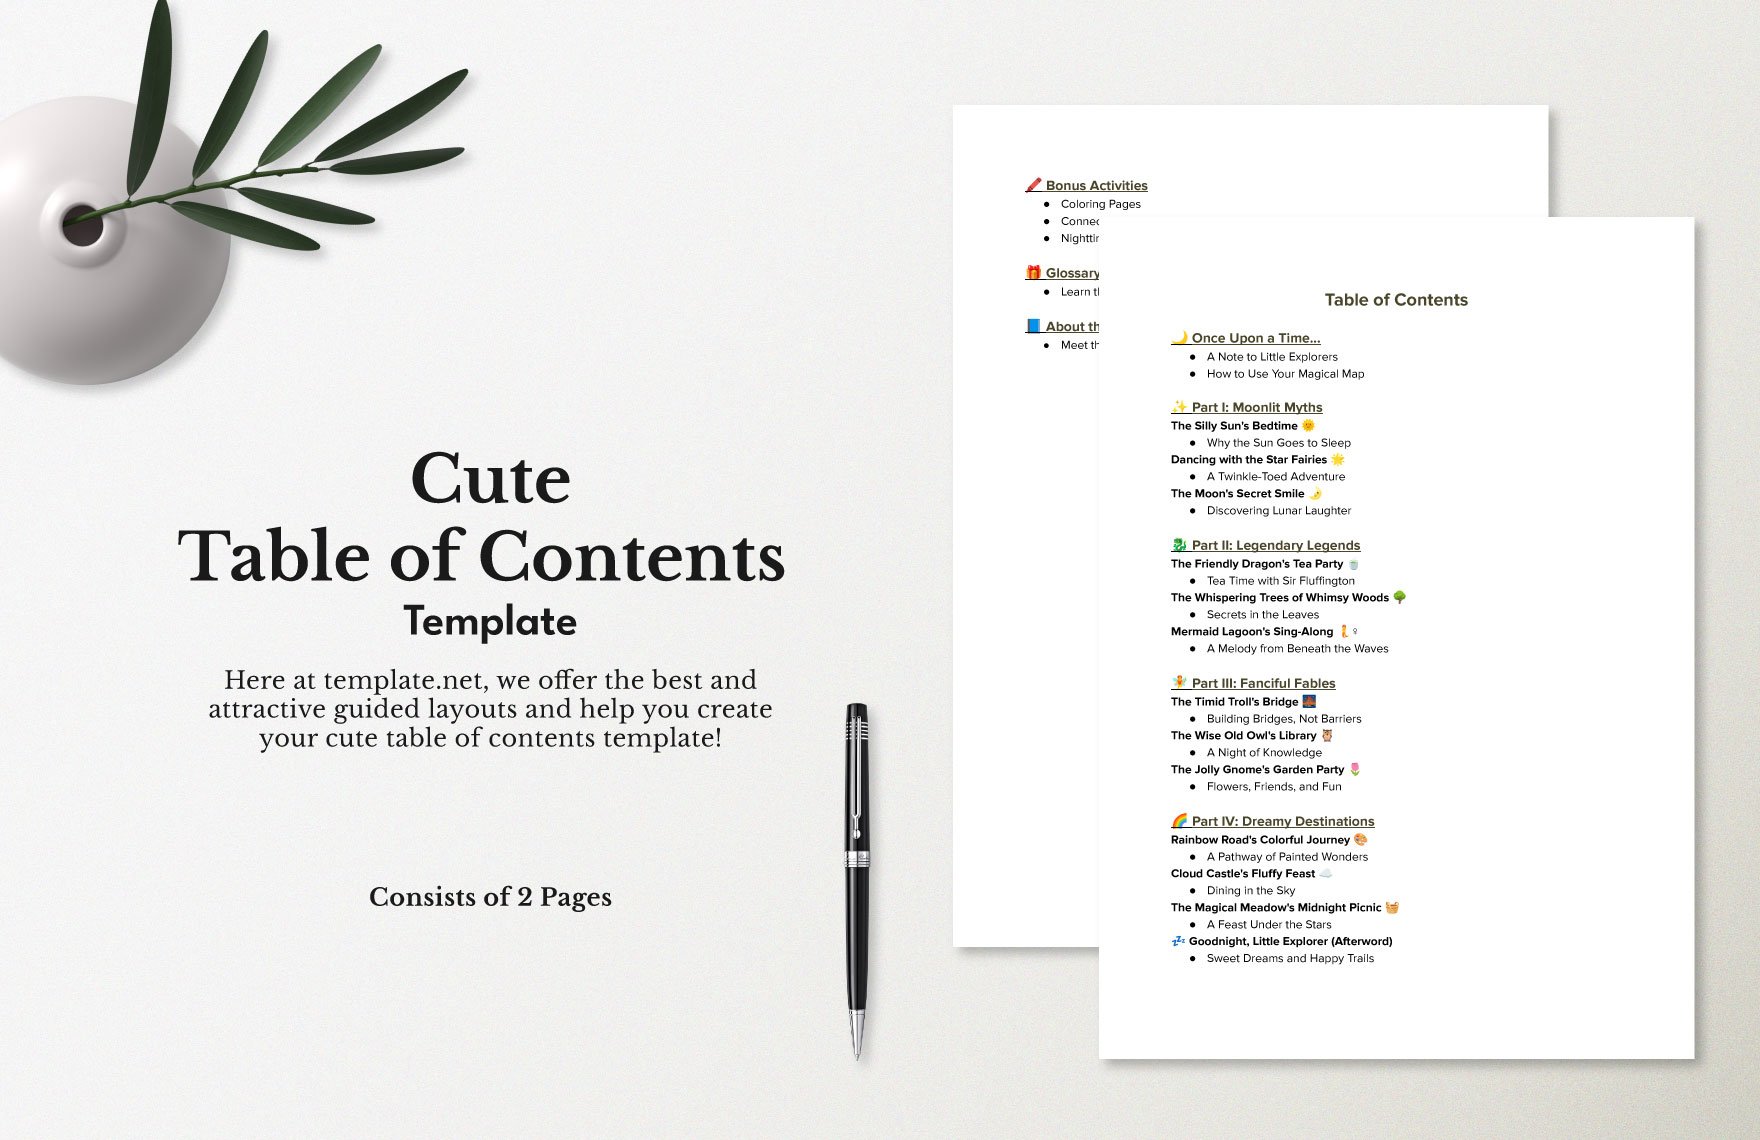 Free Cute Table of Contents Template in Word, Google Docs, PDF